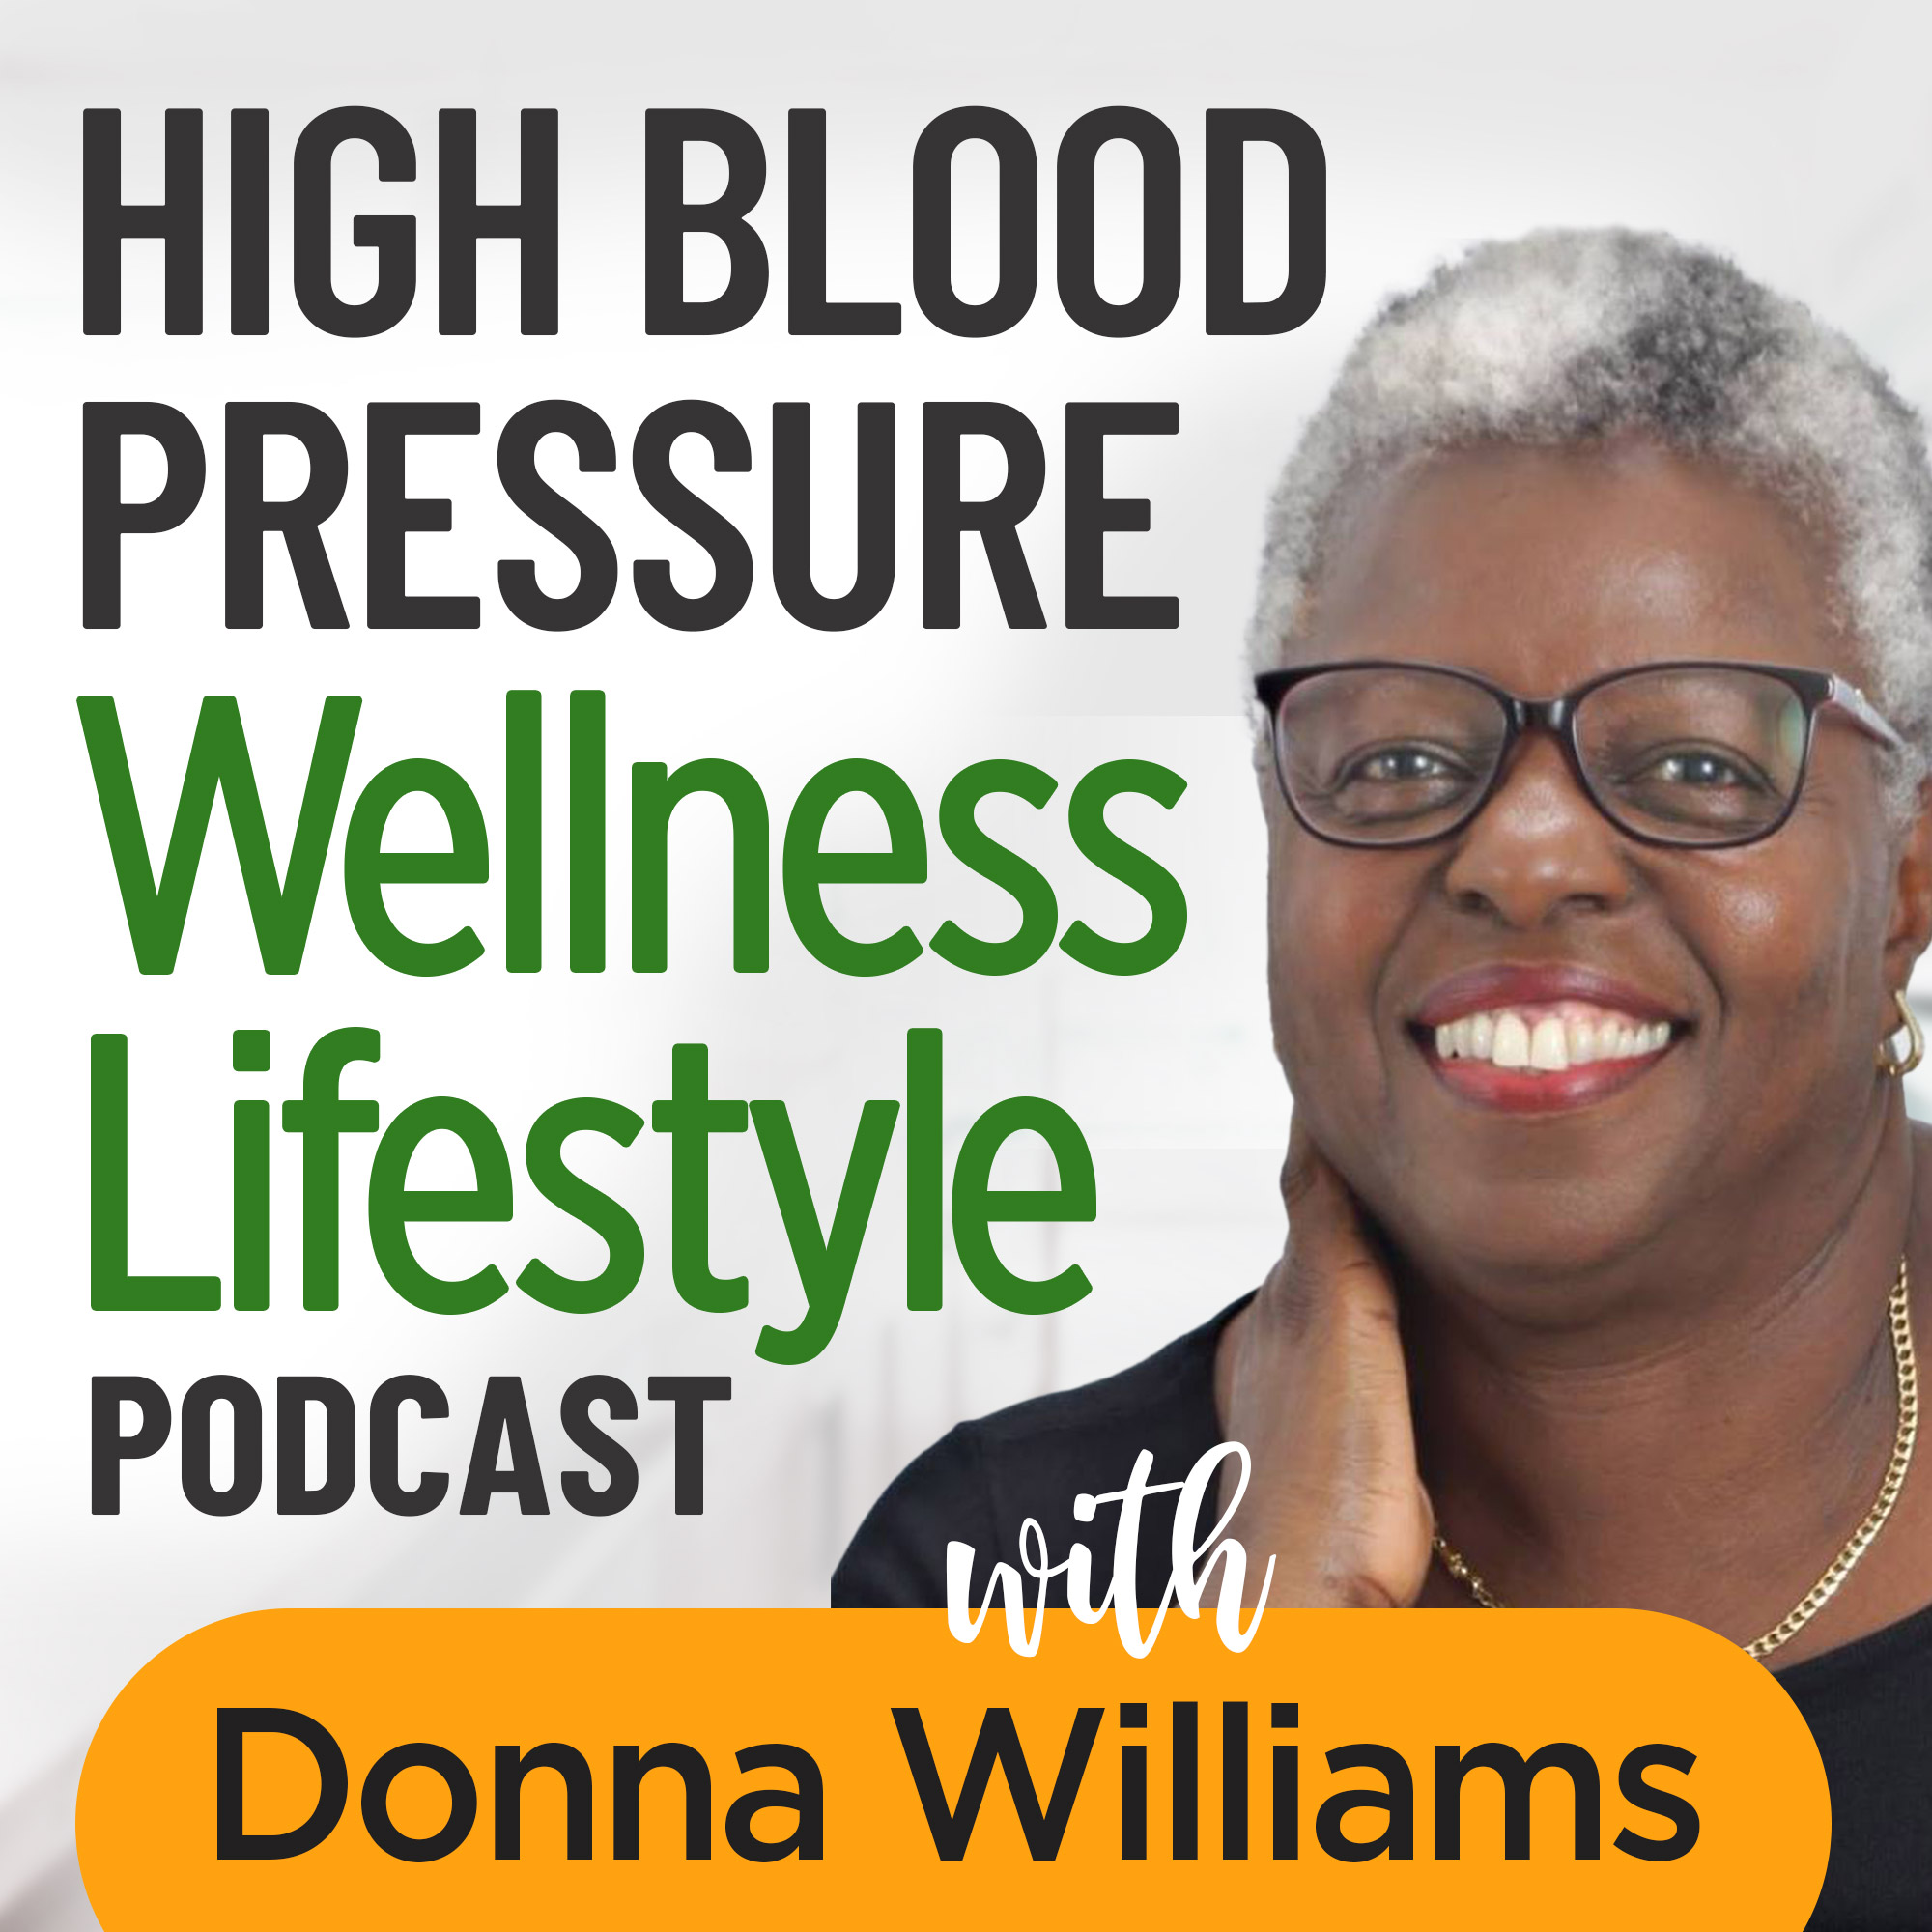 hbp podcast picture.  https://www.info-on-high-blood-pressure.com/heart-healthy-lifestyle.html